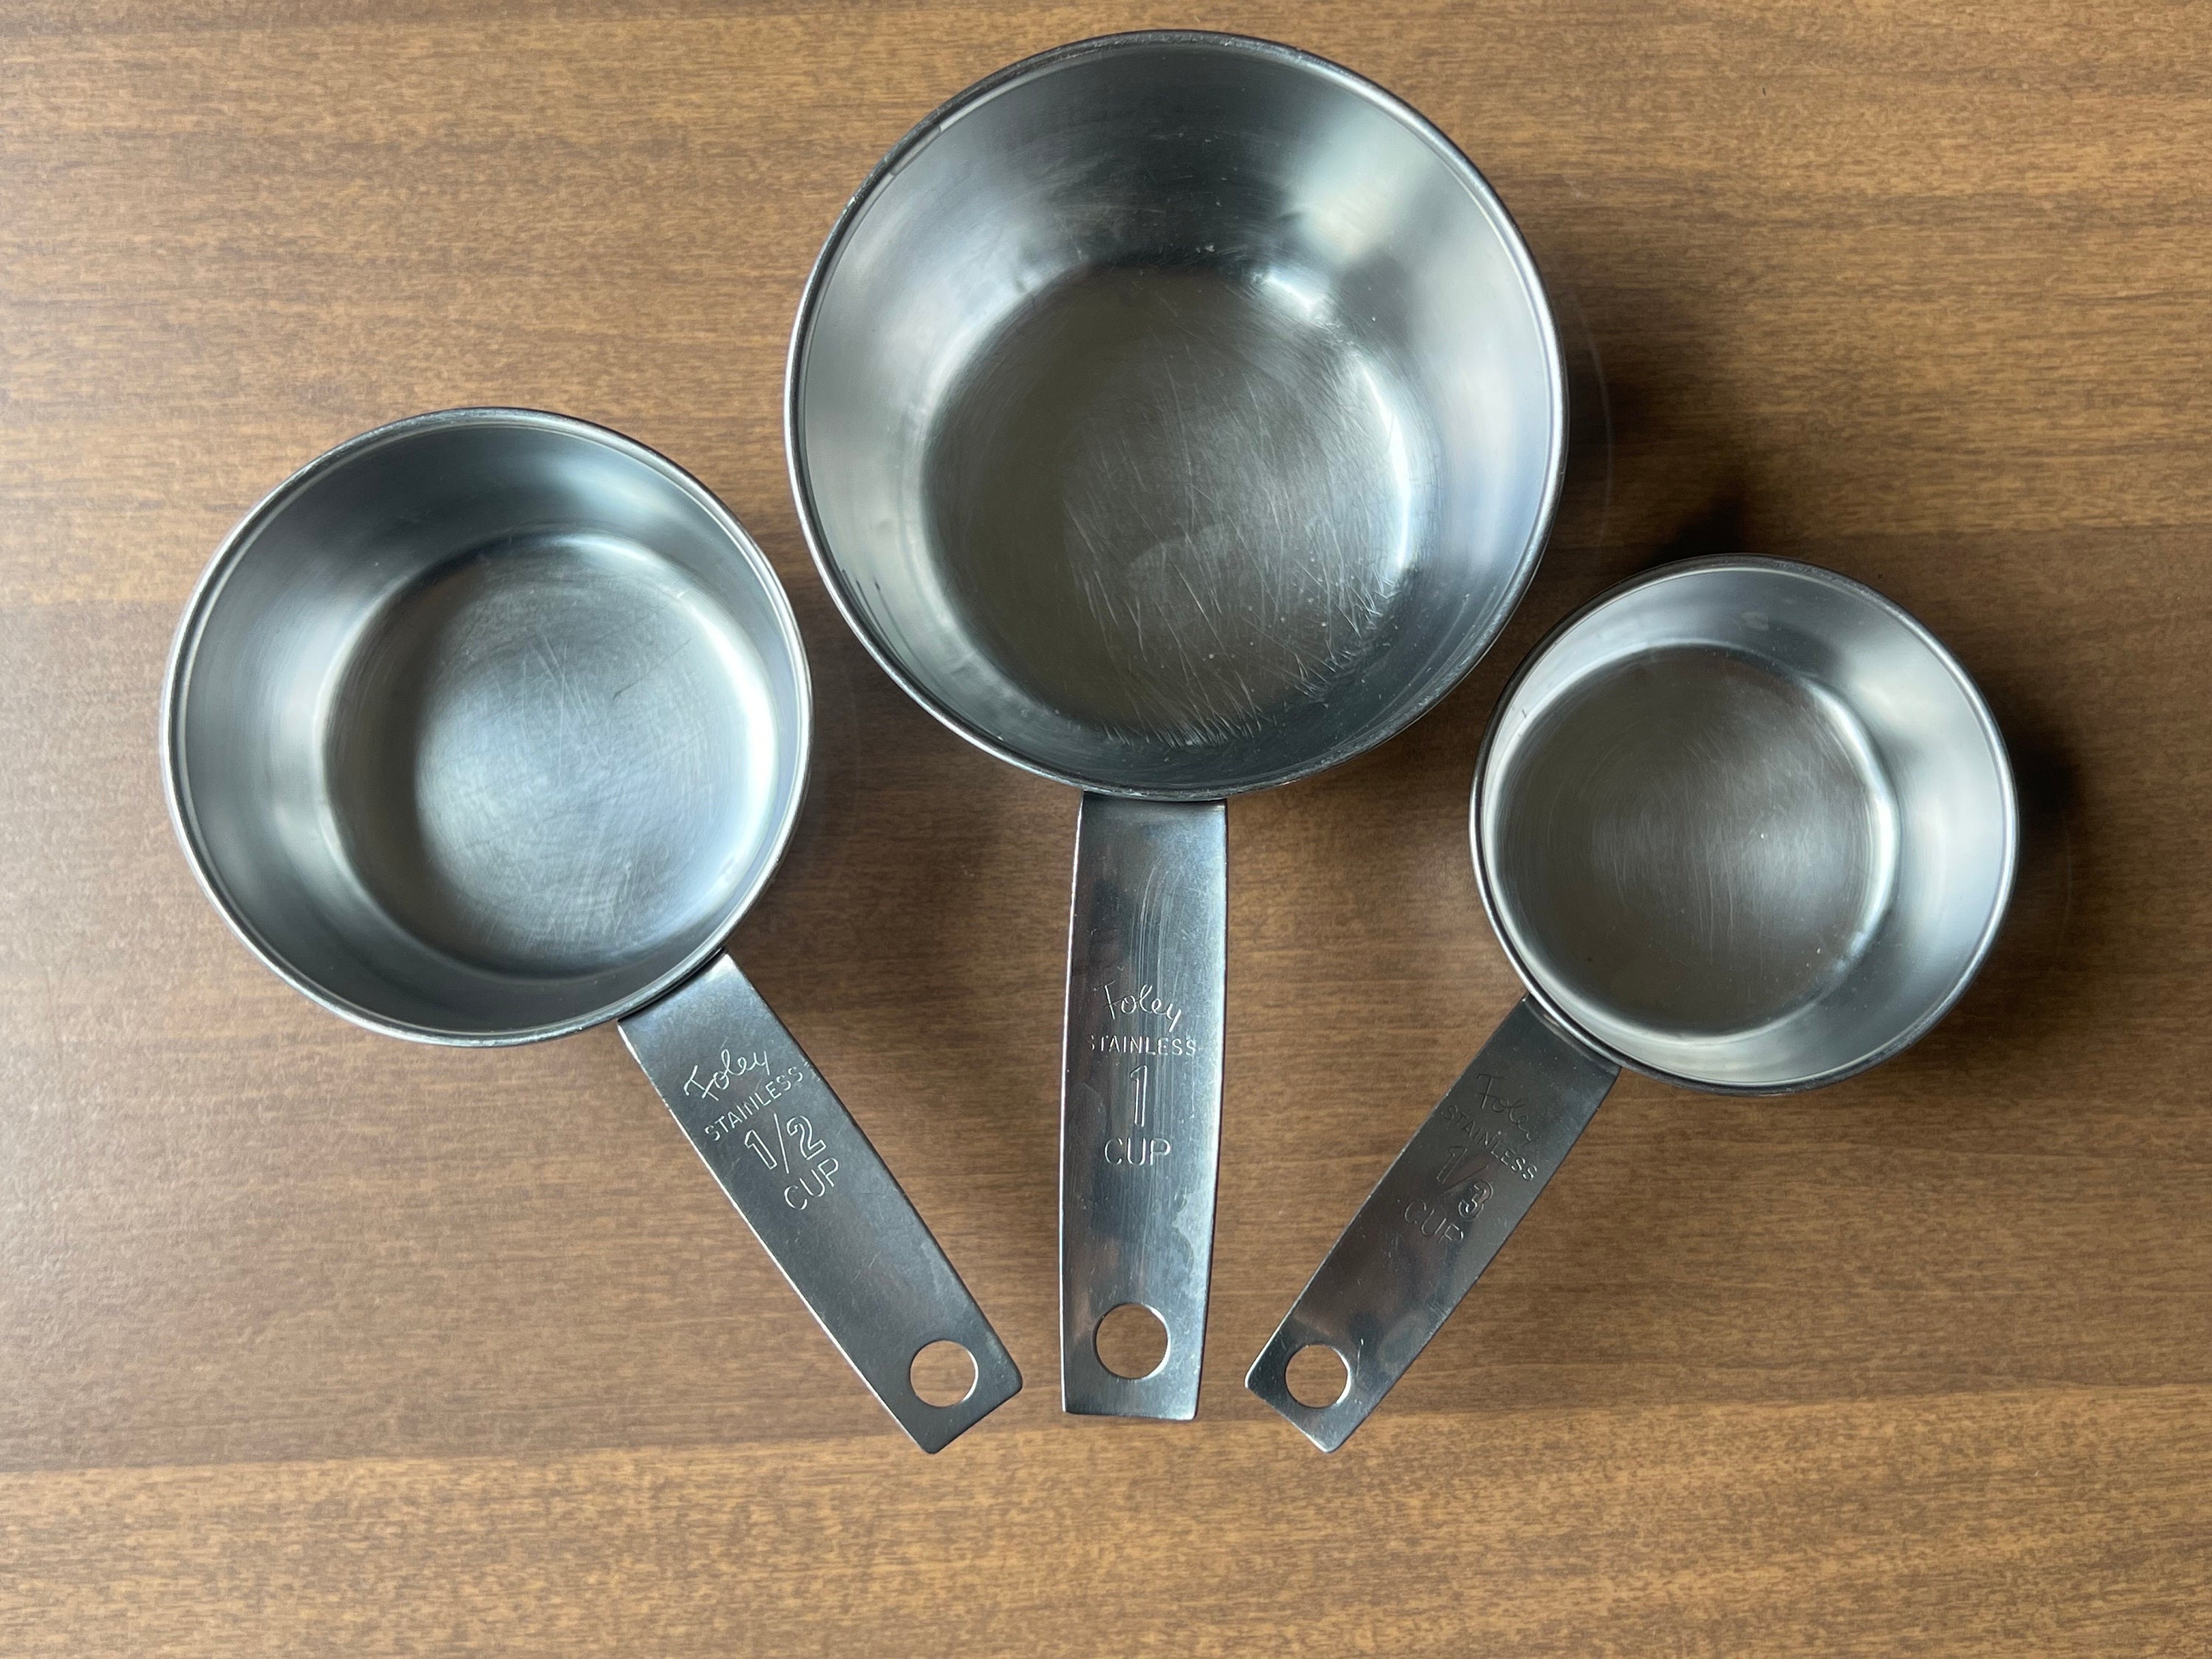 Vintage Foley Stainless Steel 1/2 Cup Measuring Cup Kitchen Equipment